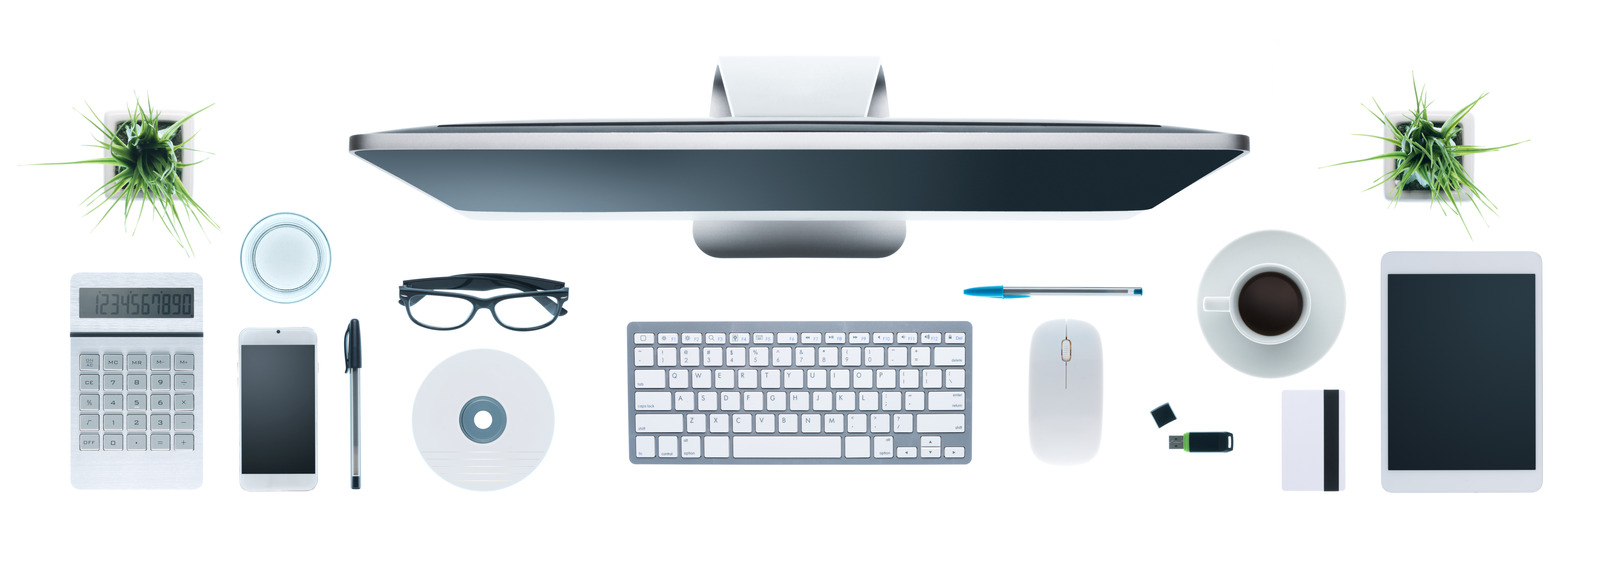 Hi-tech business desktop with computer, tablet, smartphone, calculator and other objects, top view, white background